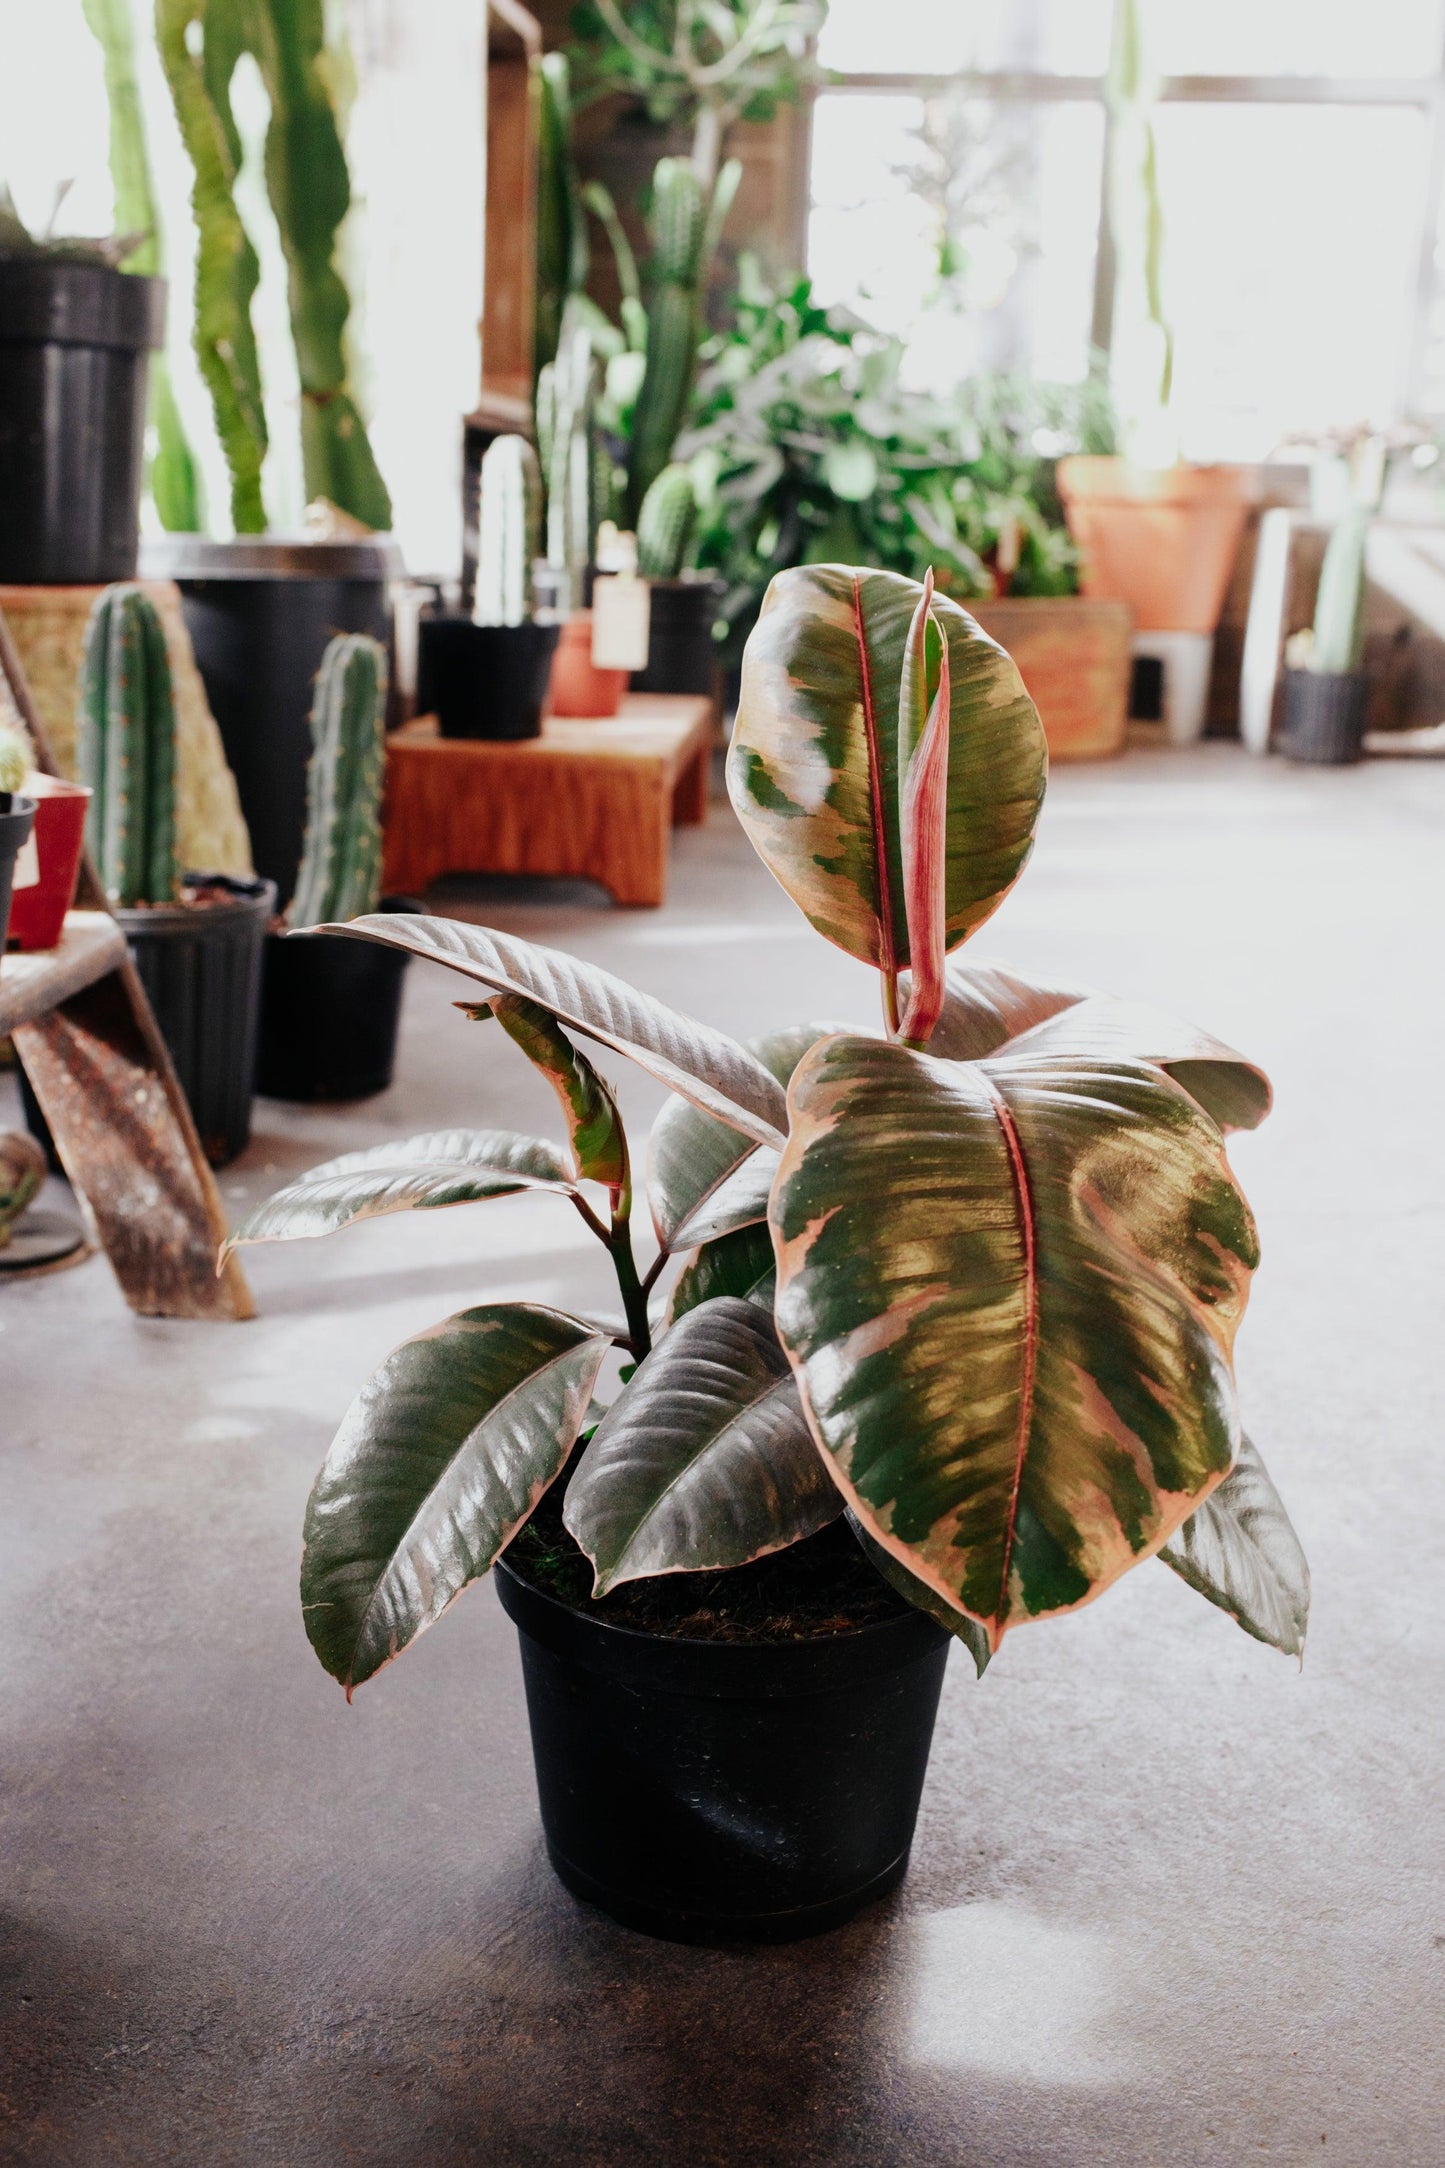 Ficus 'Ruby pink' Rubber tree